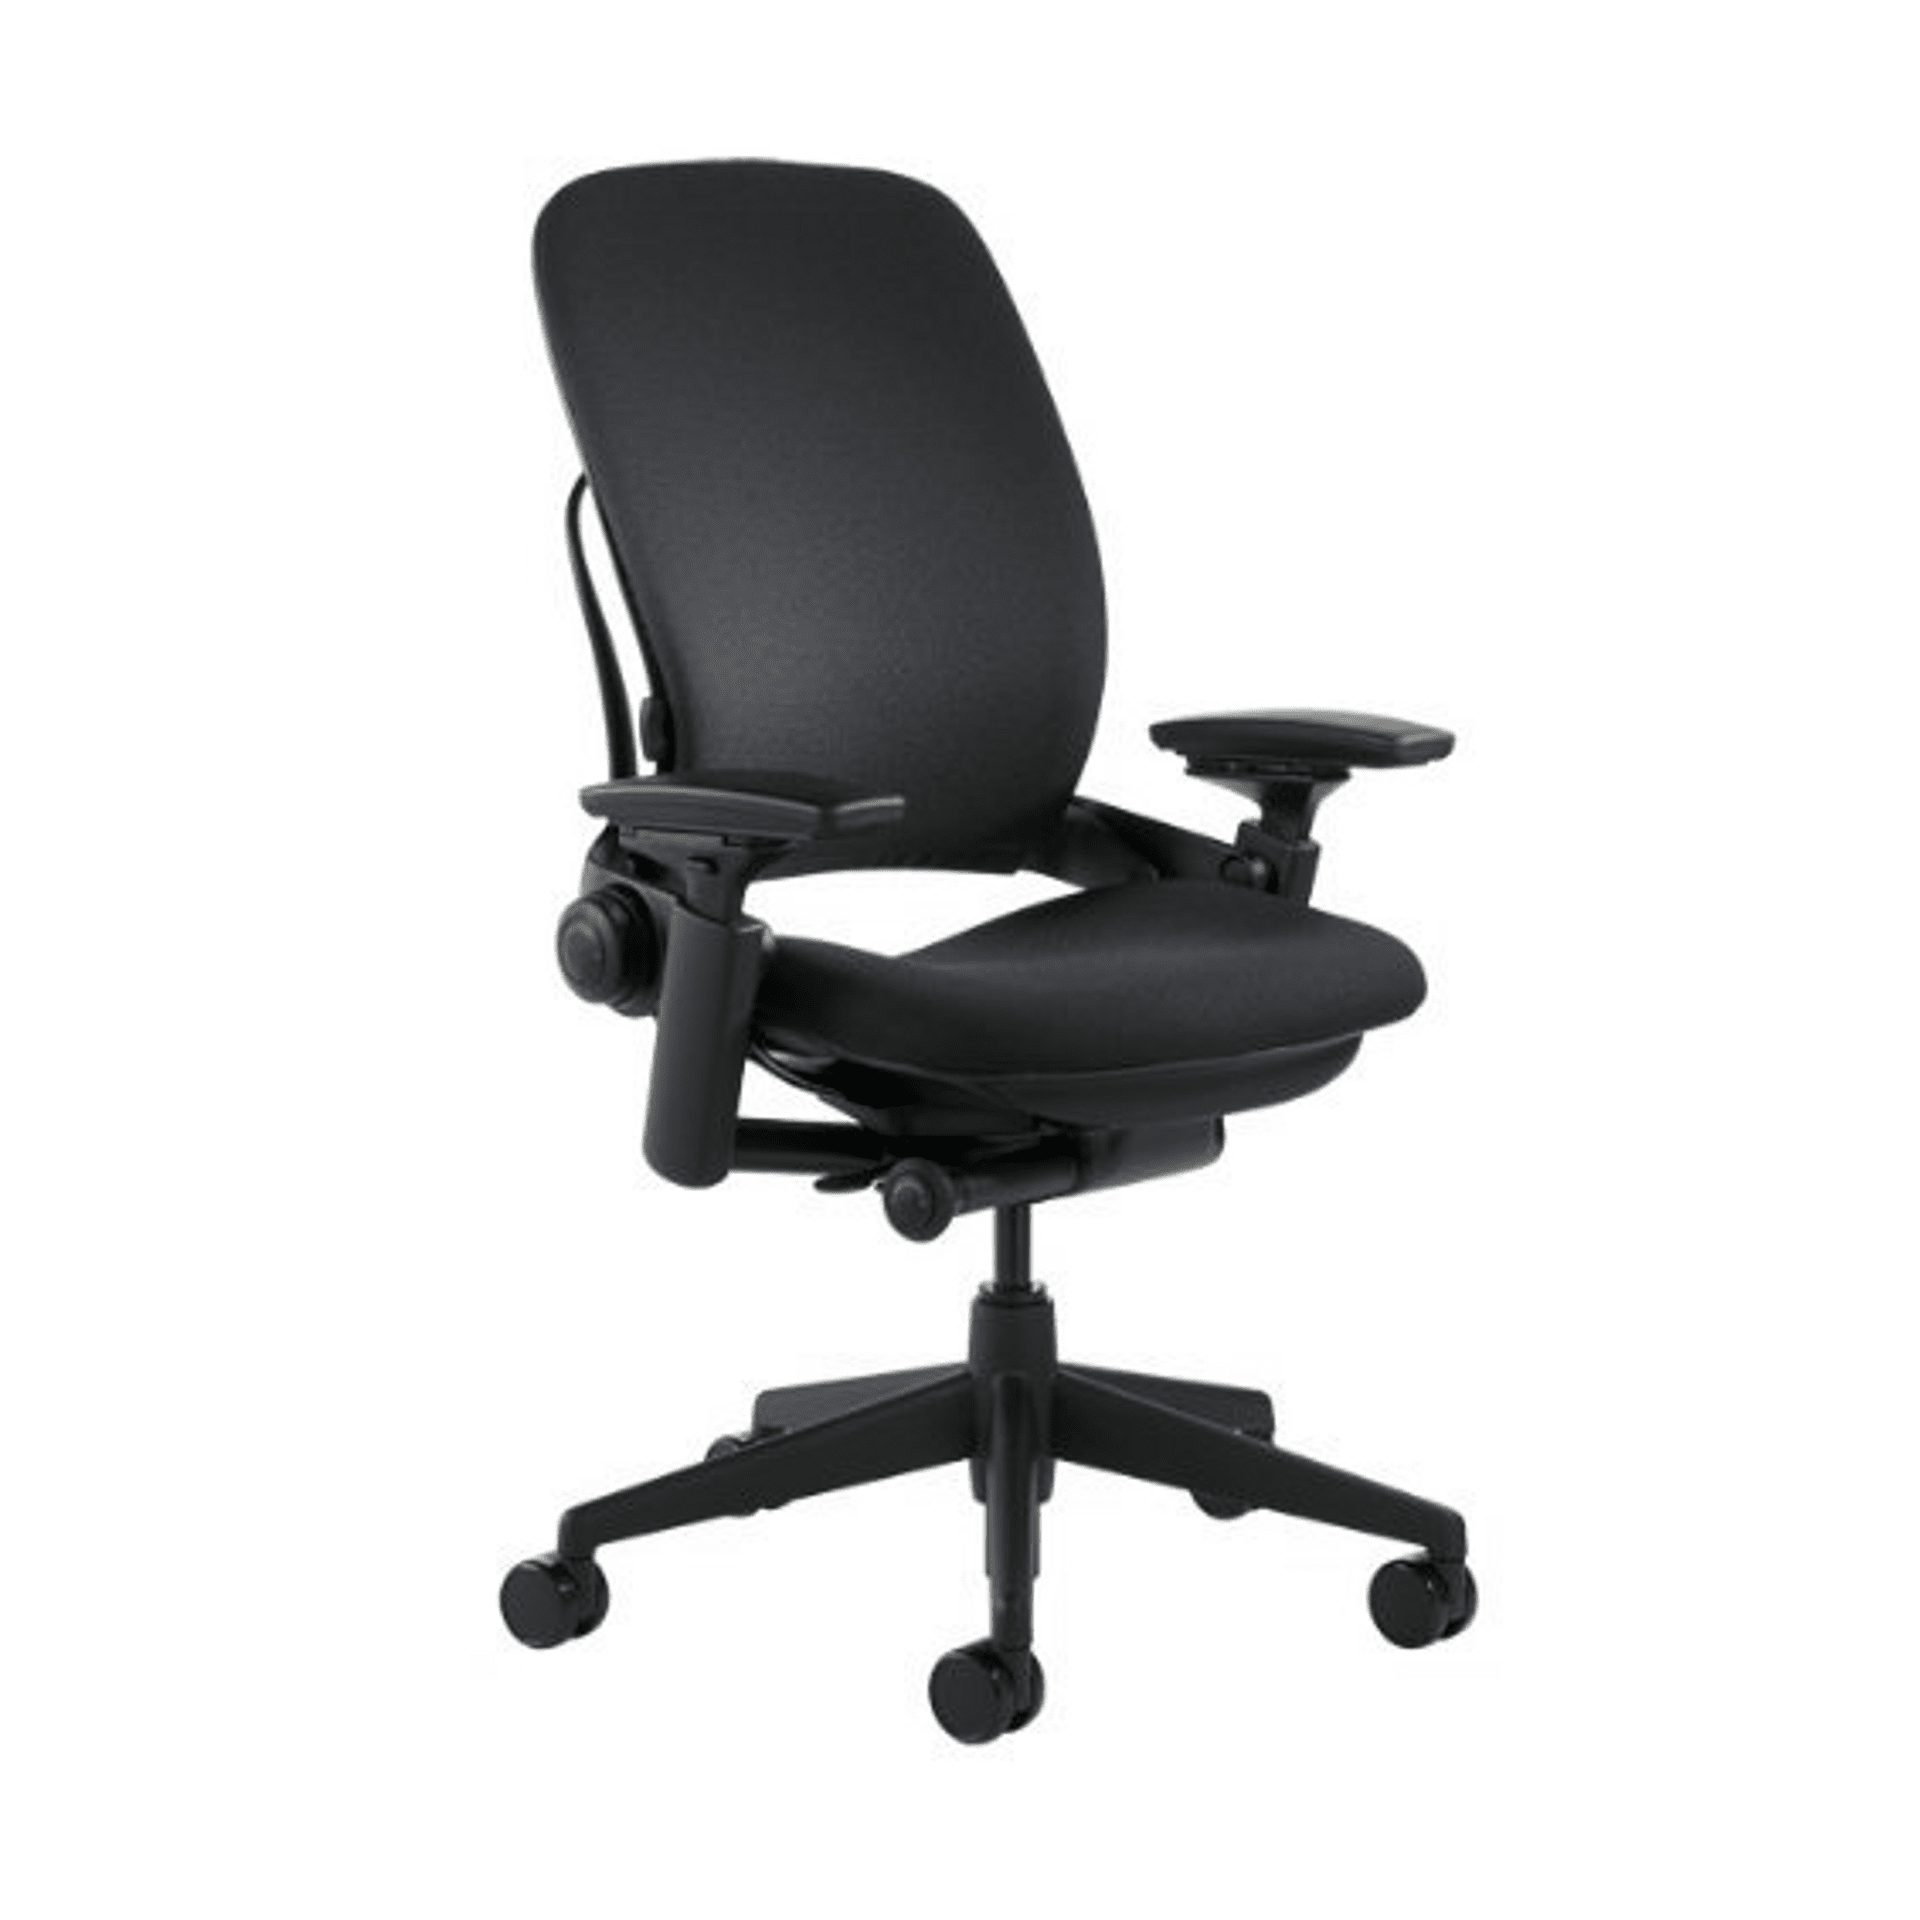 Steelcase Leap chair V2  | Black | Fabric Fully Adjustable Tilt Tension 4 Way Adjustable Arms - chairorama